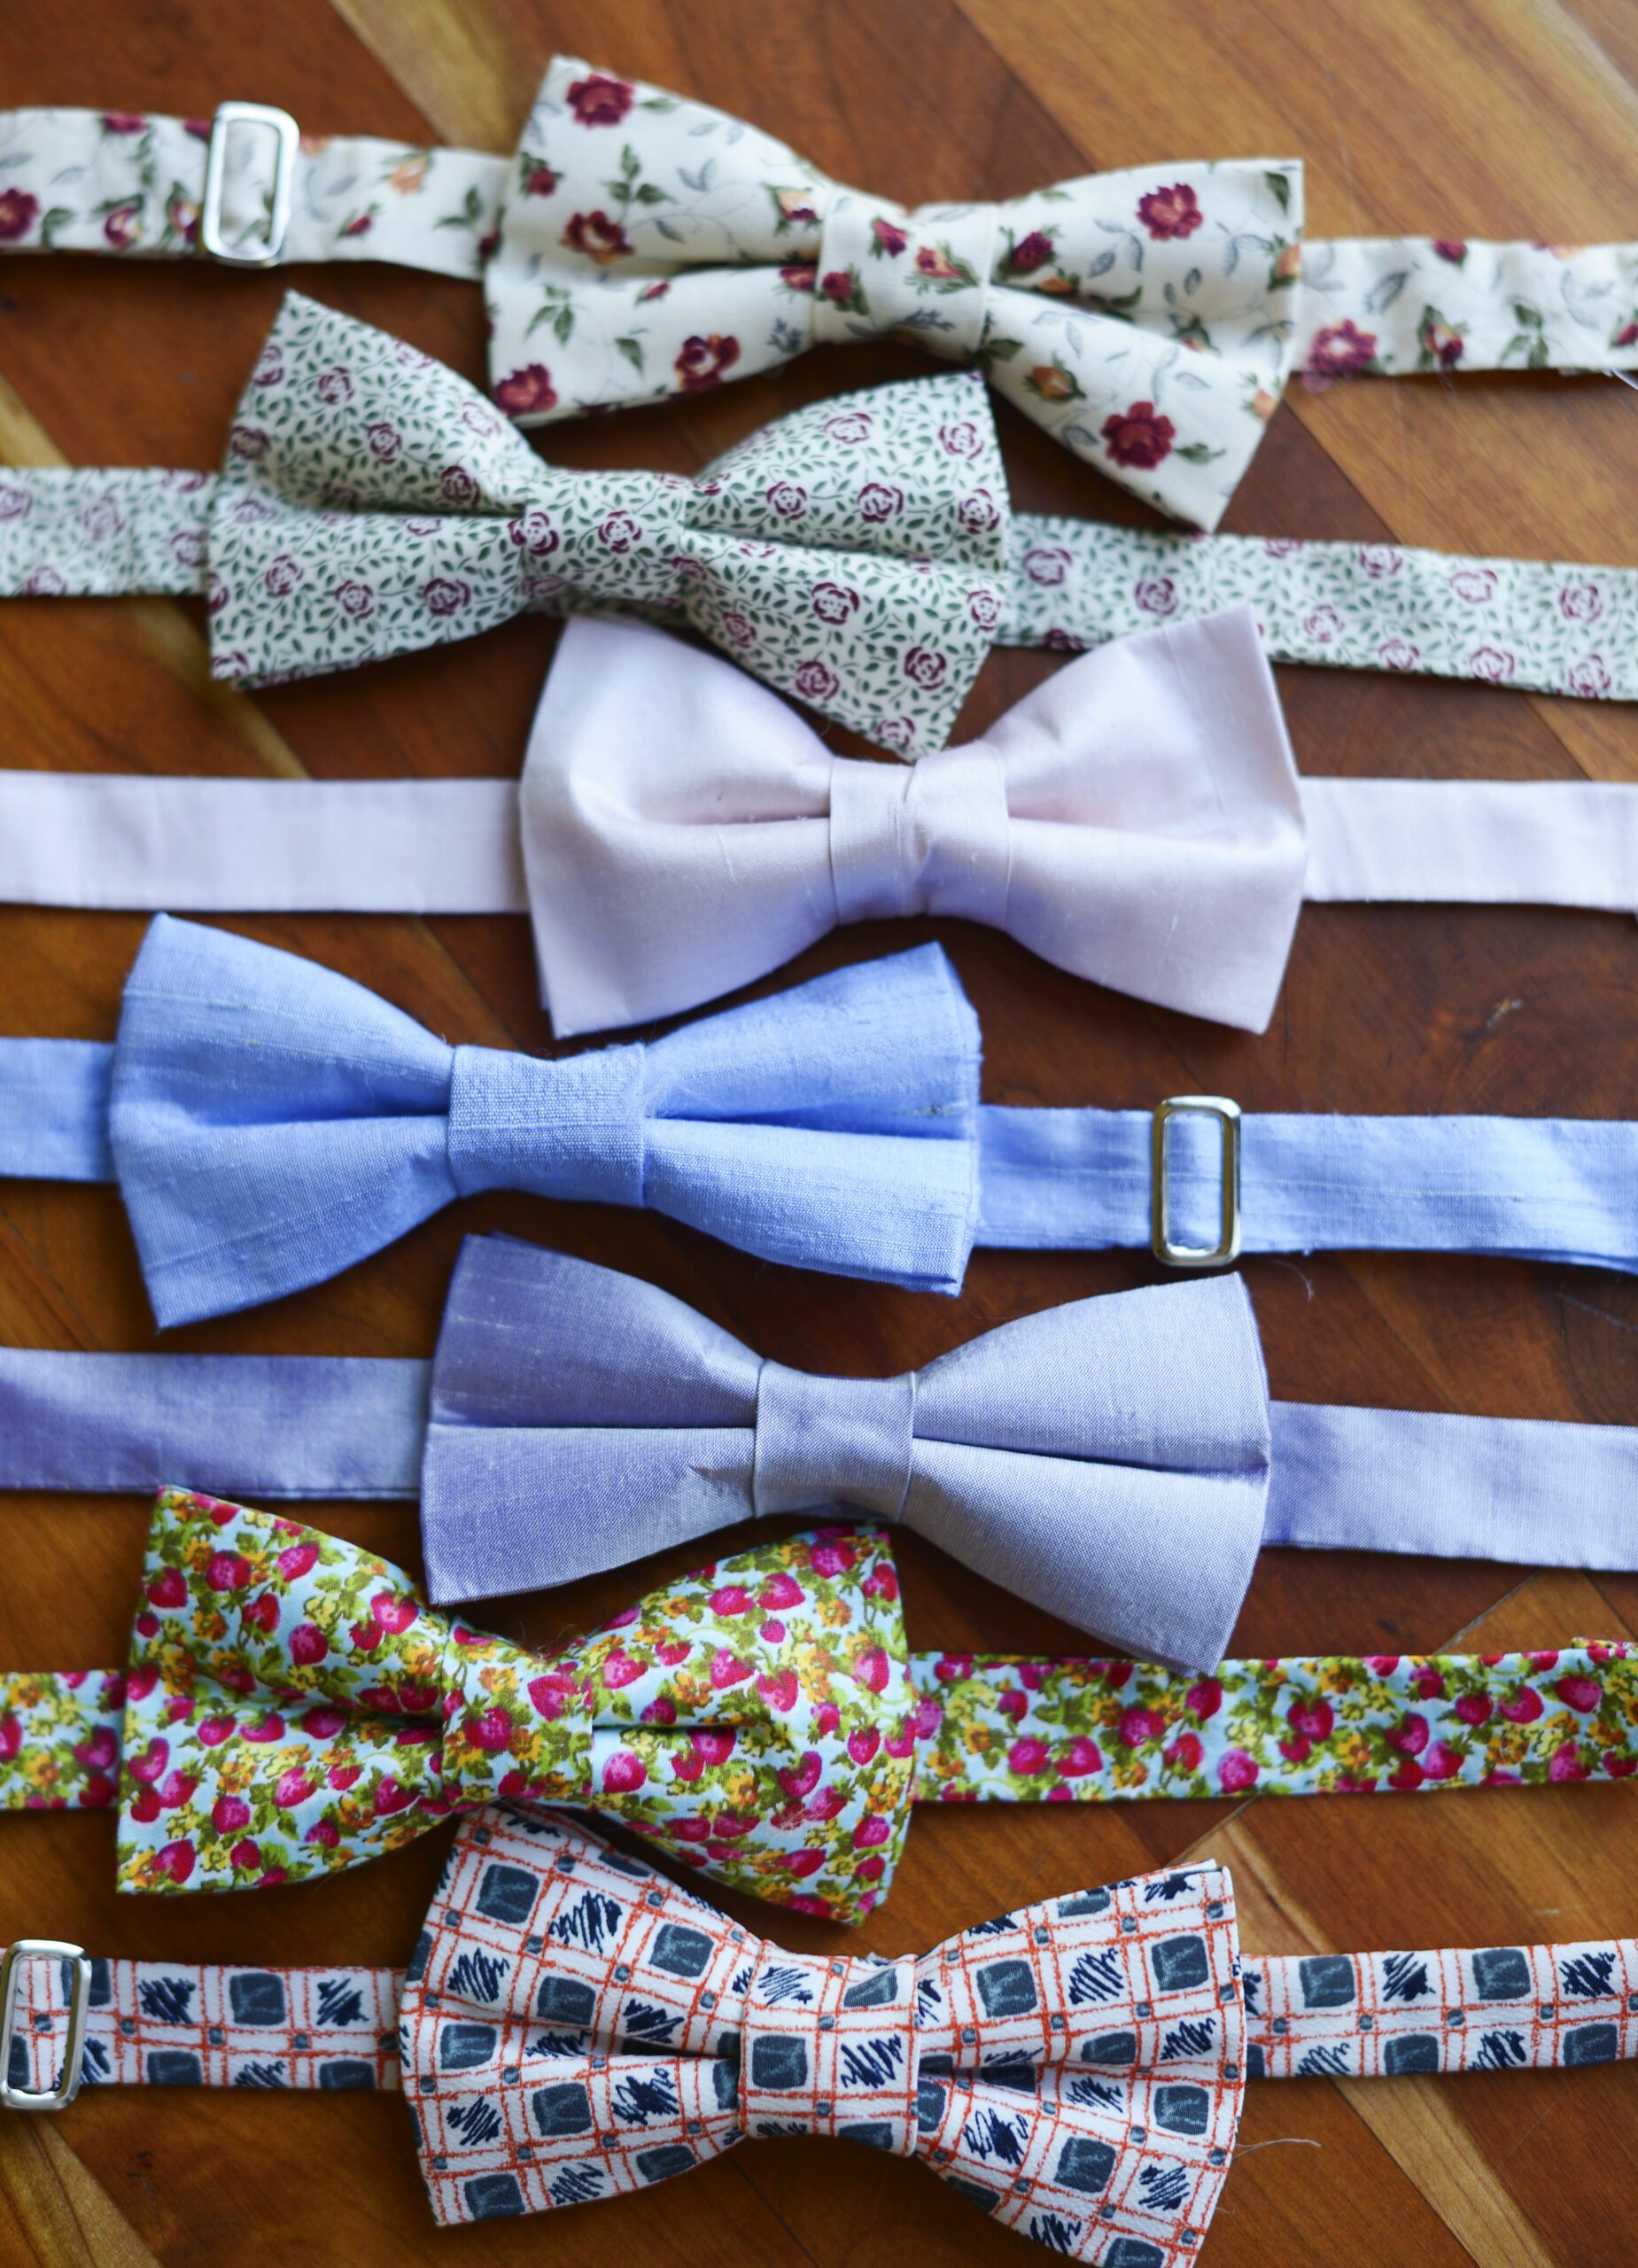 A photo of a range of bow ties in different floral patterns